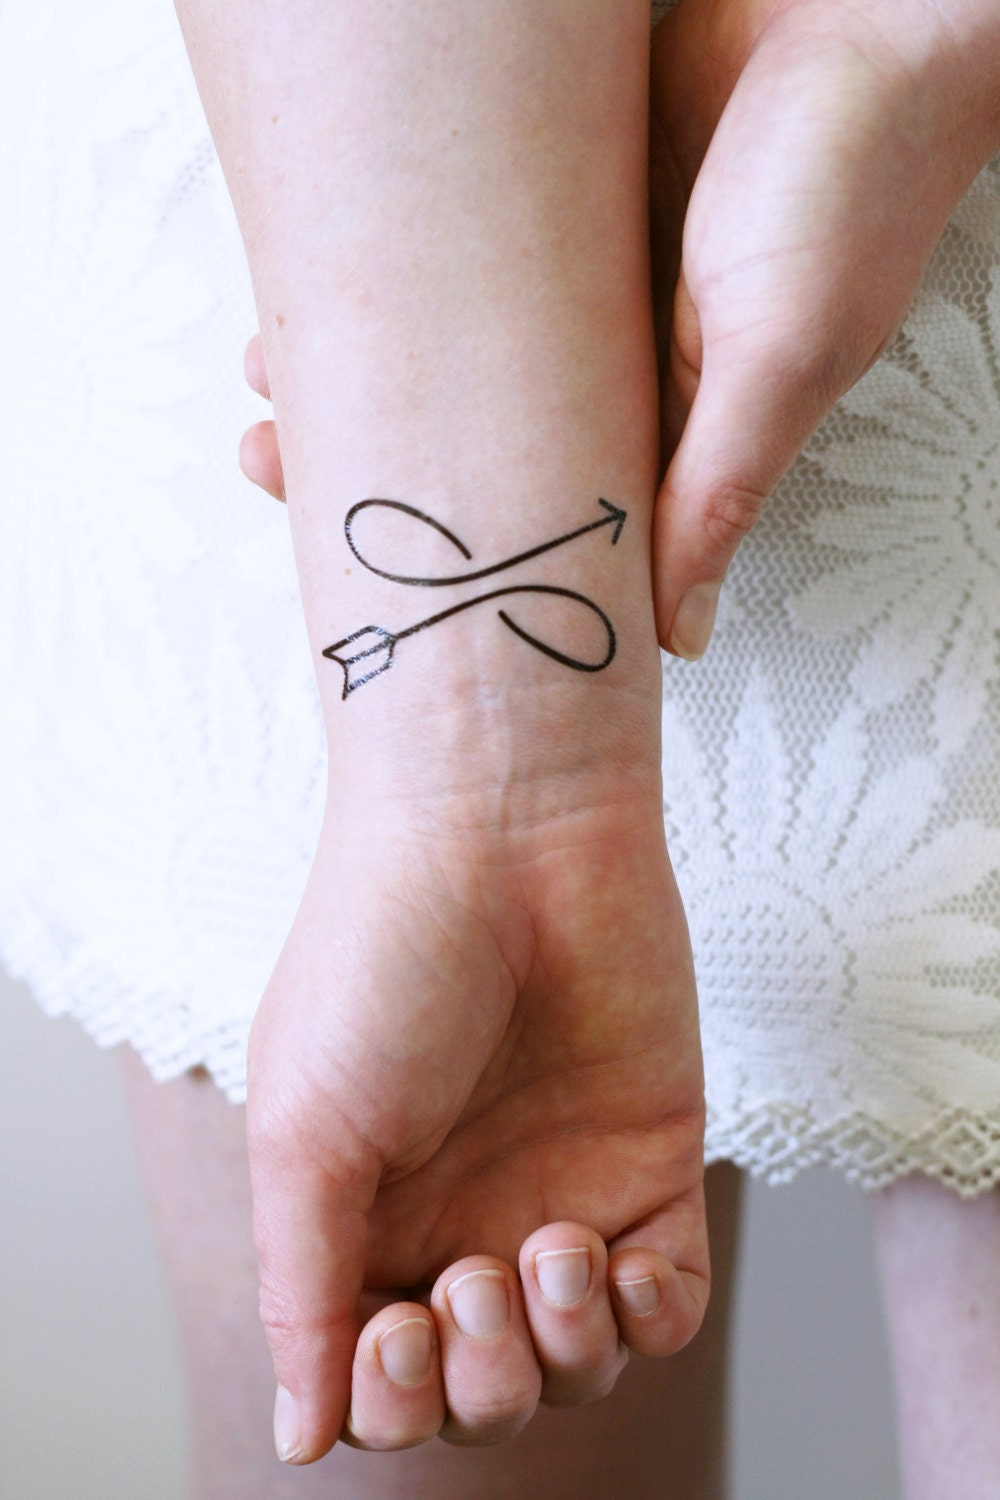 What kind of tattoo would you like to get as your first tattoo? - Quora